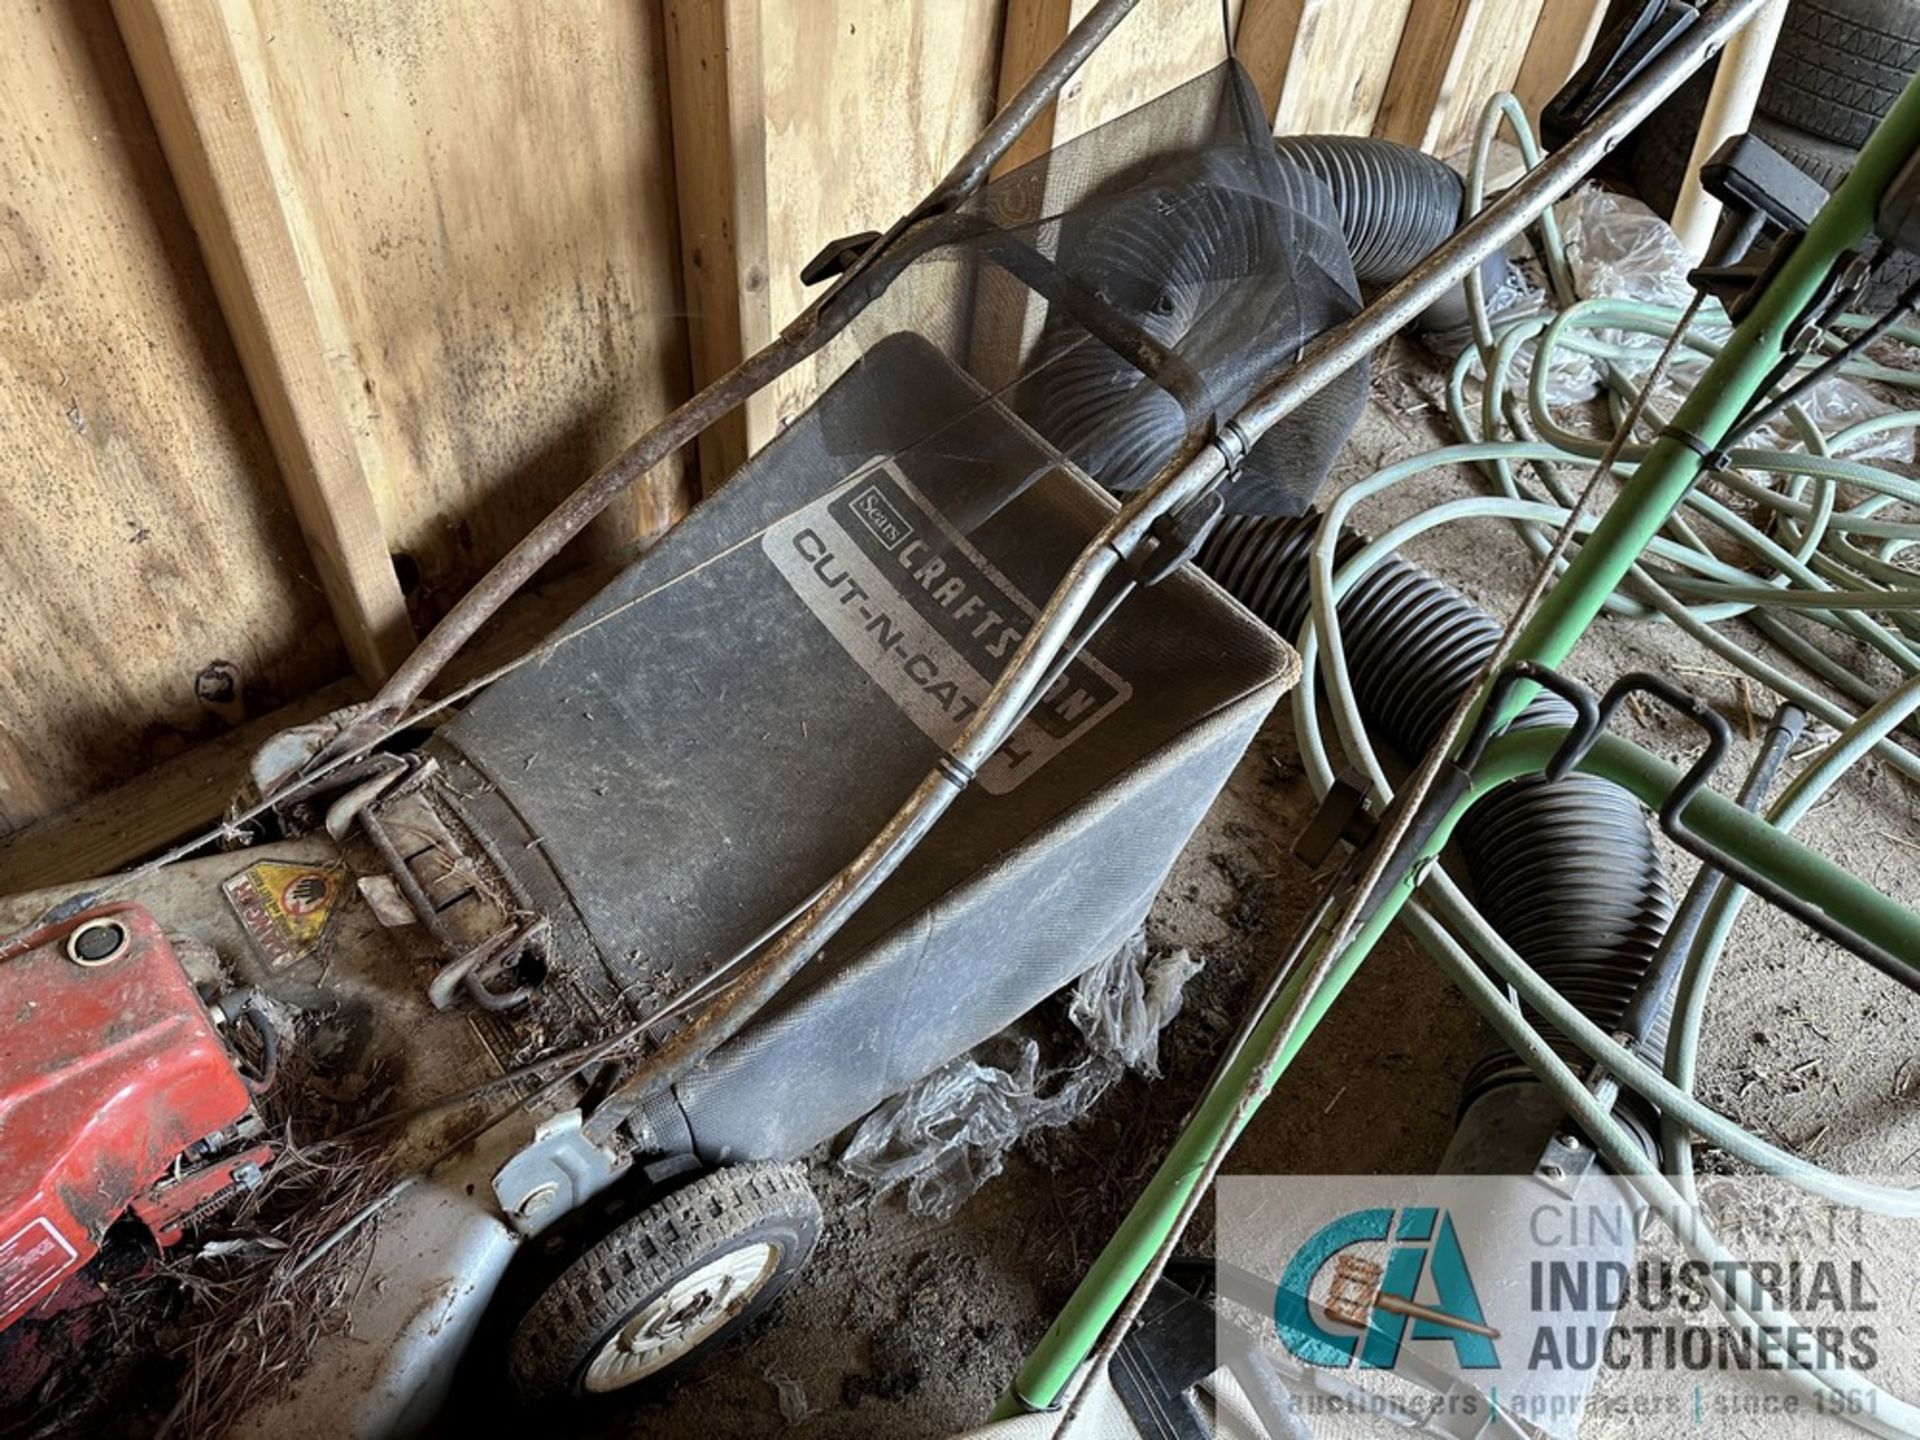 (LOT) CONTENTS OF SHED CONSISTING OF LANDSCAPE POWER EQUIPMENT PVC, GARDEN HOSE, STEPLADDERS * - Image 7 of 23